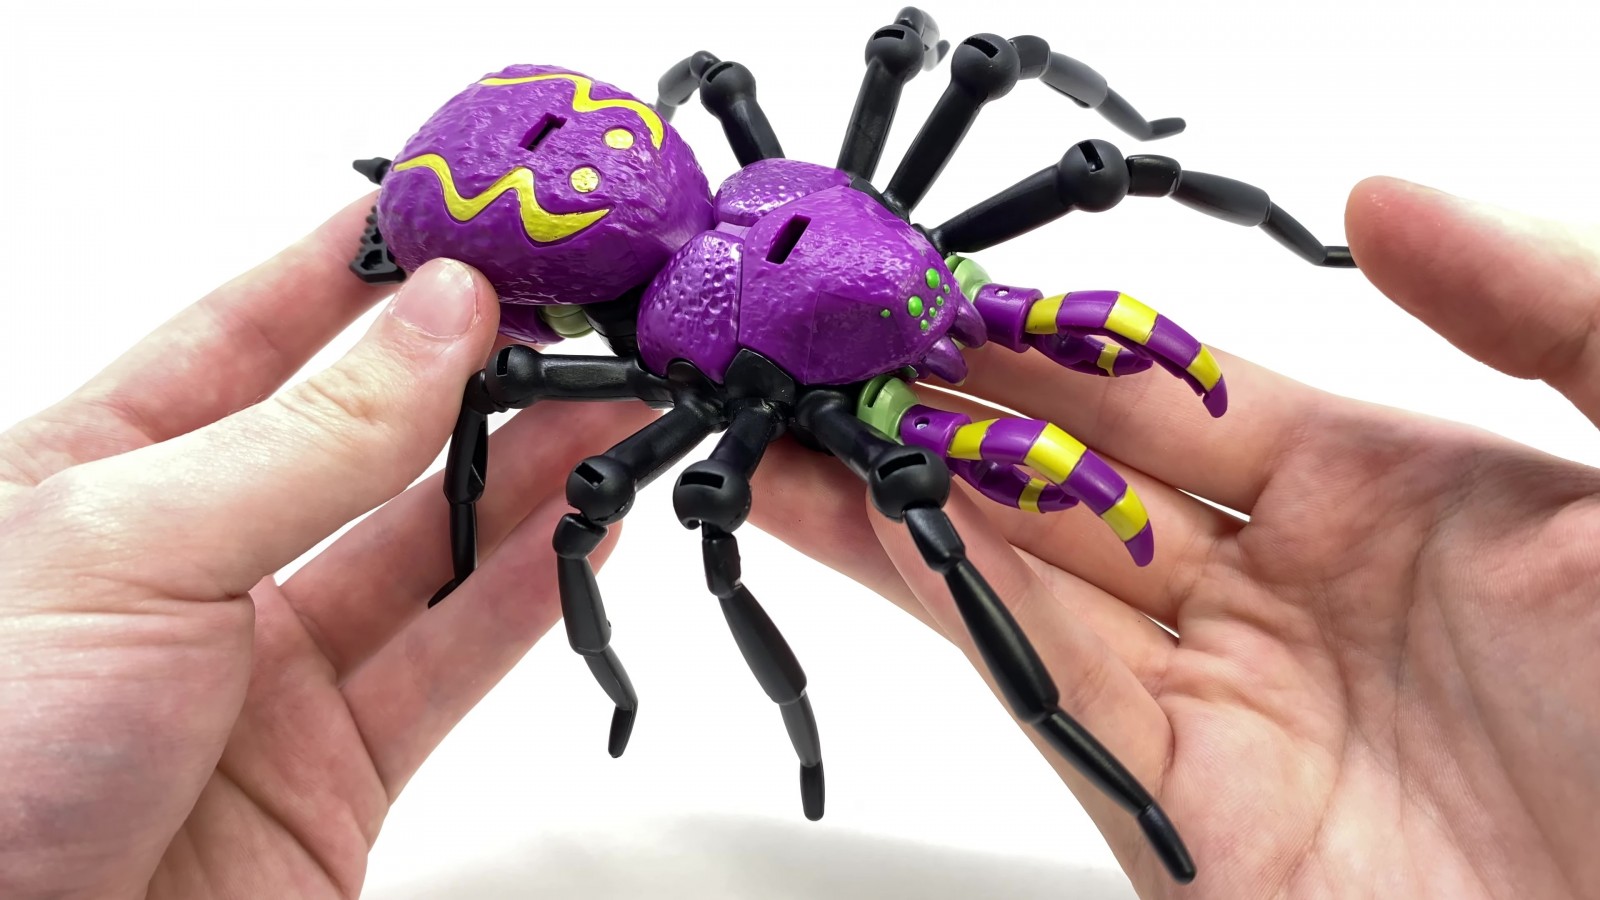 In Hand Images of Transformers Deluxe Legacy Tarantulas